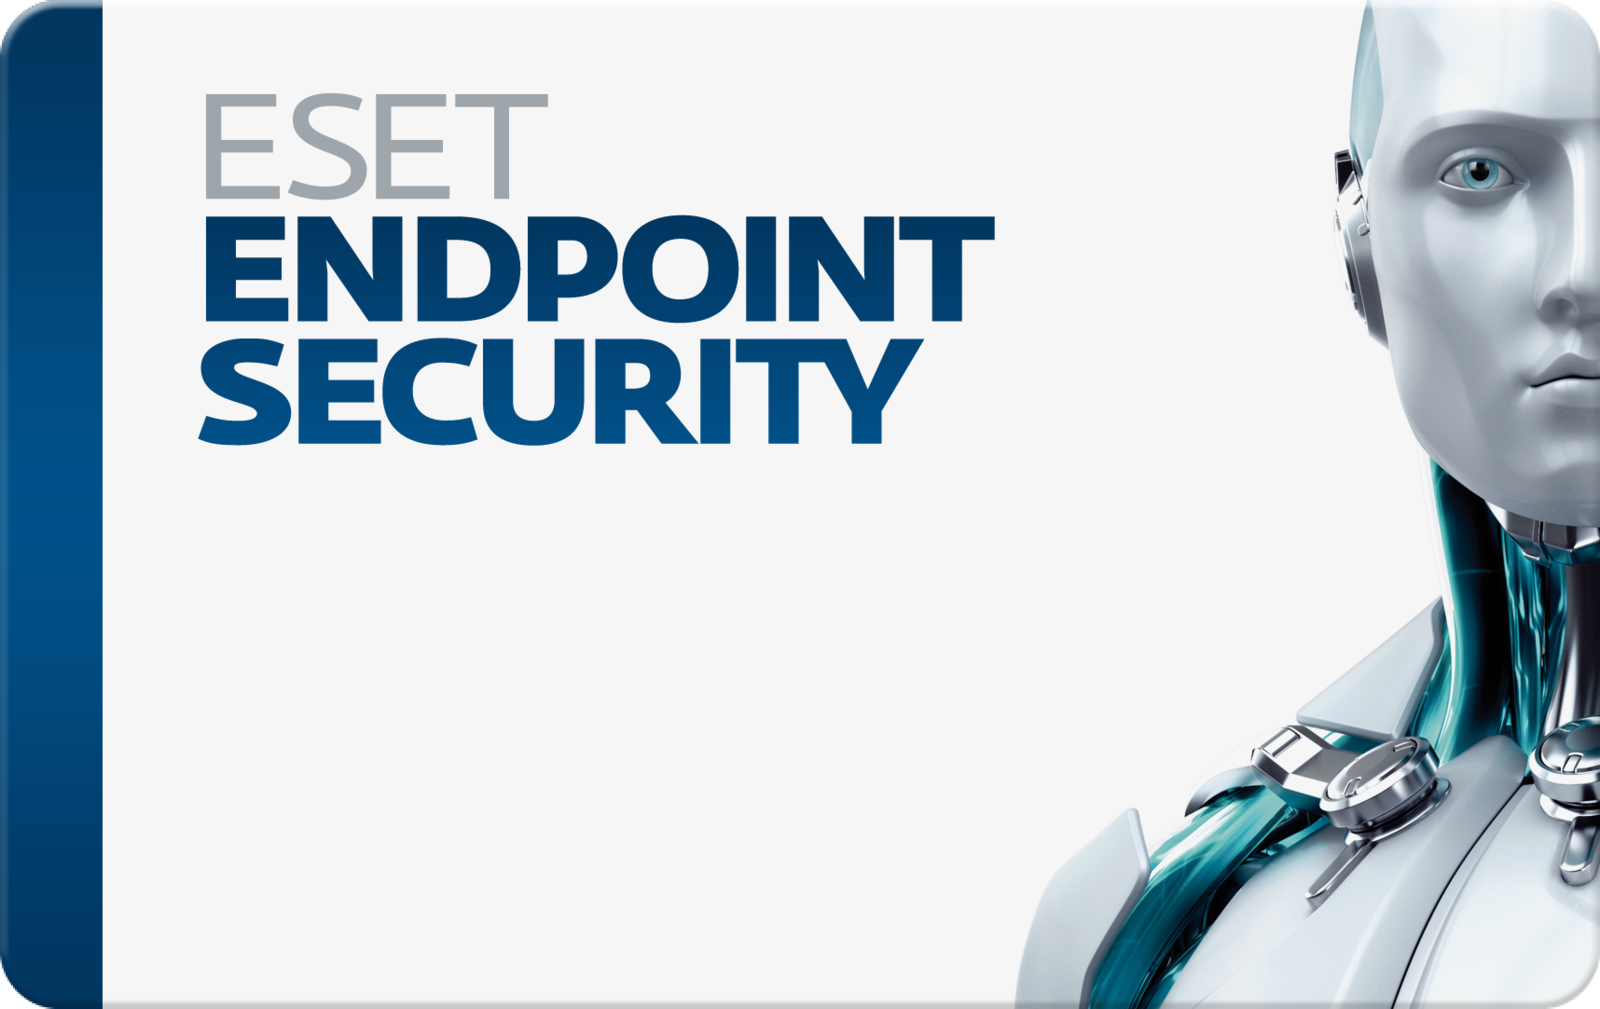 ESET Endpoint Security 11.0.2032.0 download the new version for apple